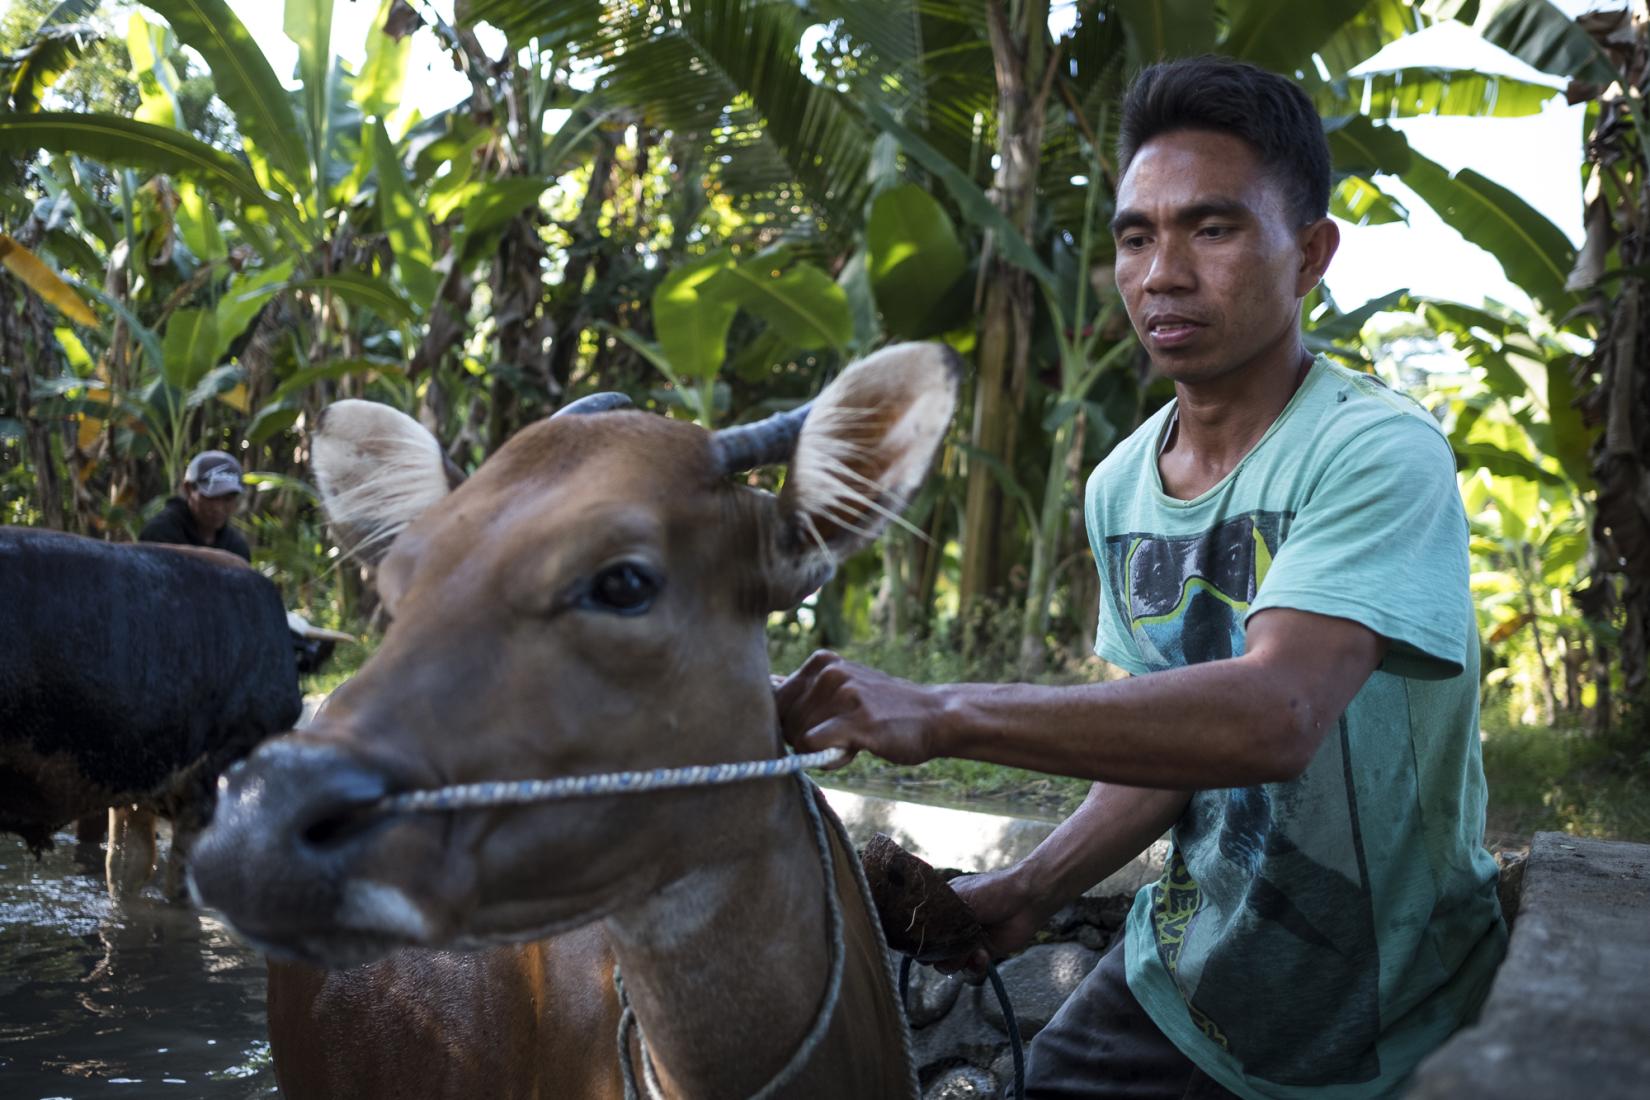 Hardiyanto the treasurer of the cattle group in Karang Kendal Hamlet washes one of his cows in a small creek.